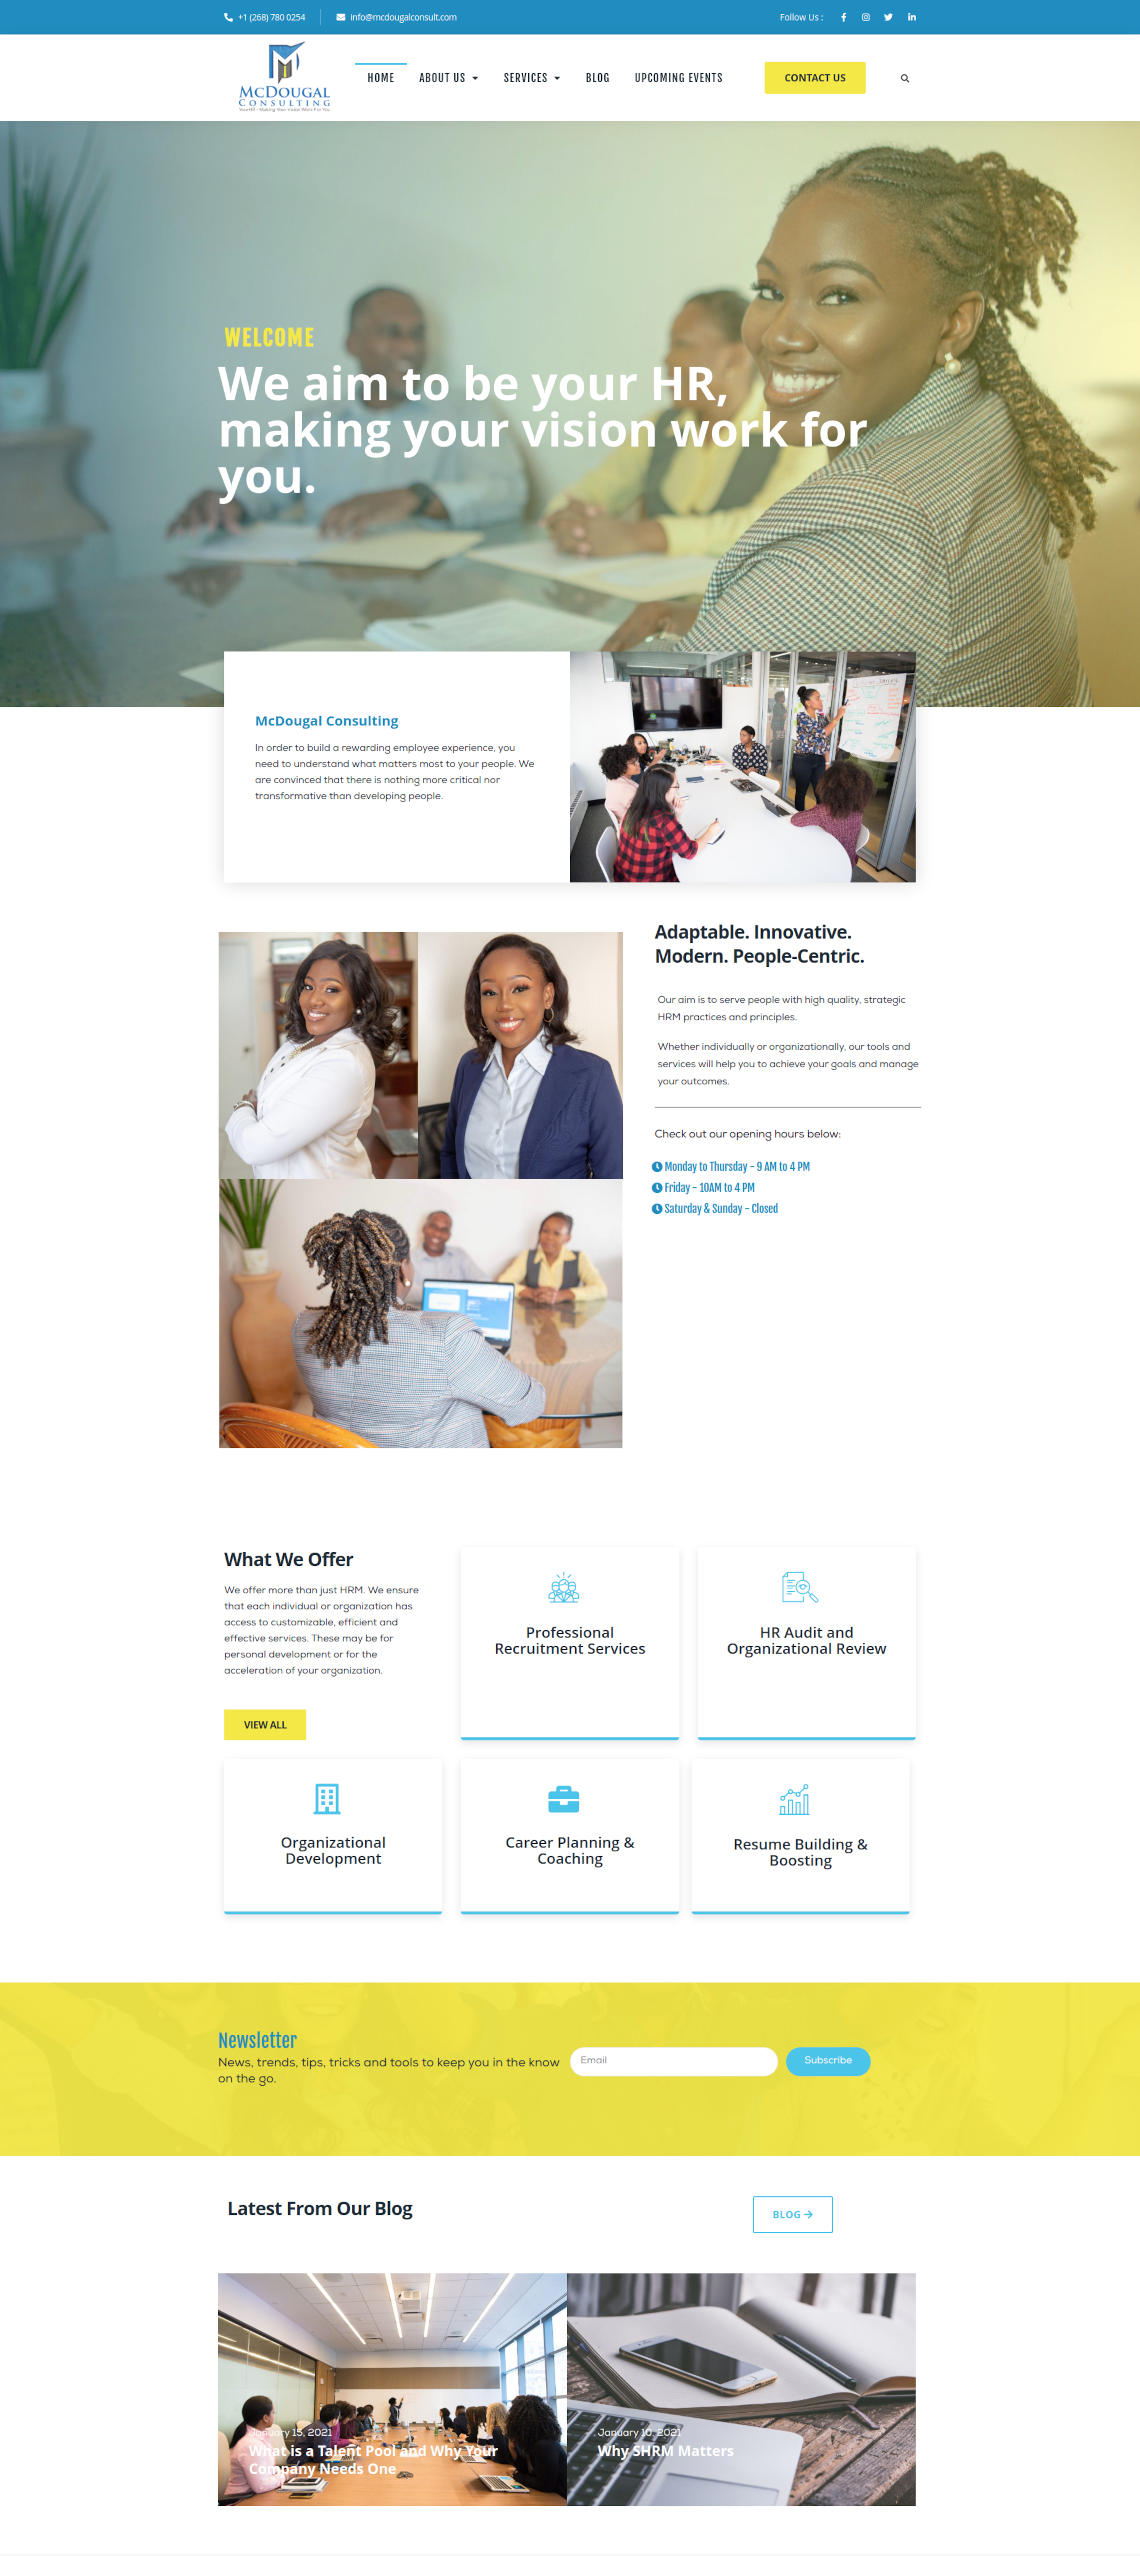 McDougal Consulting website by Anchor Monkey